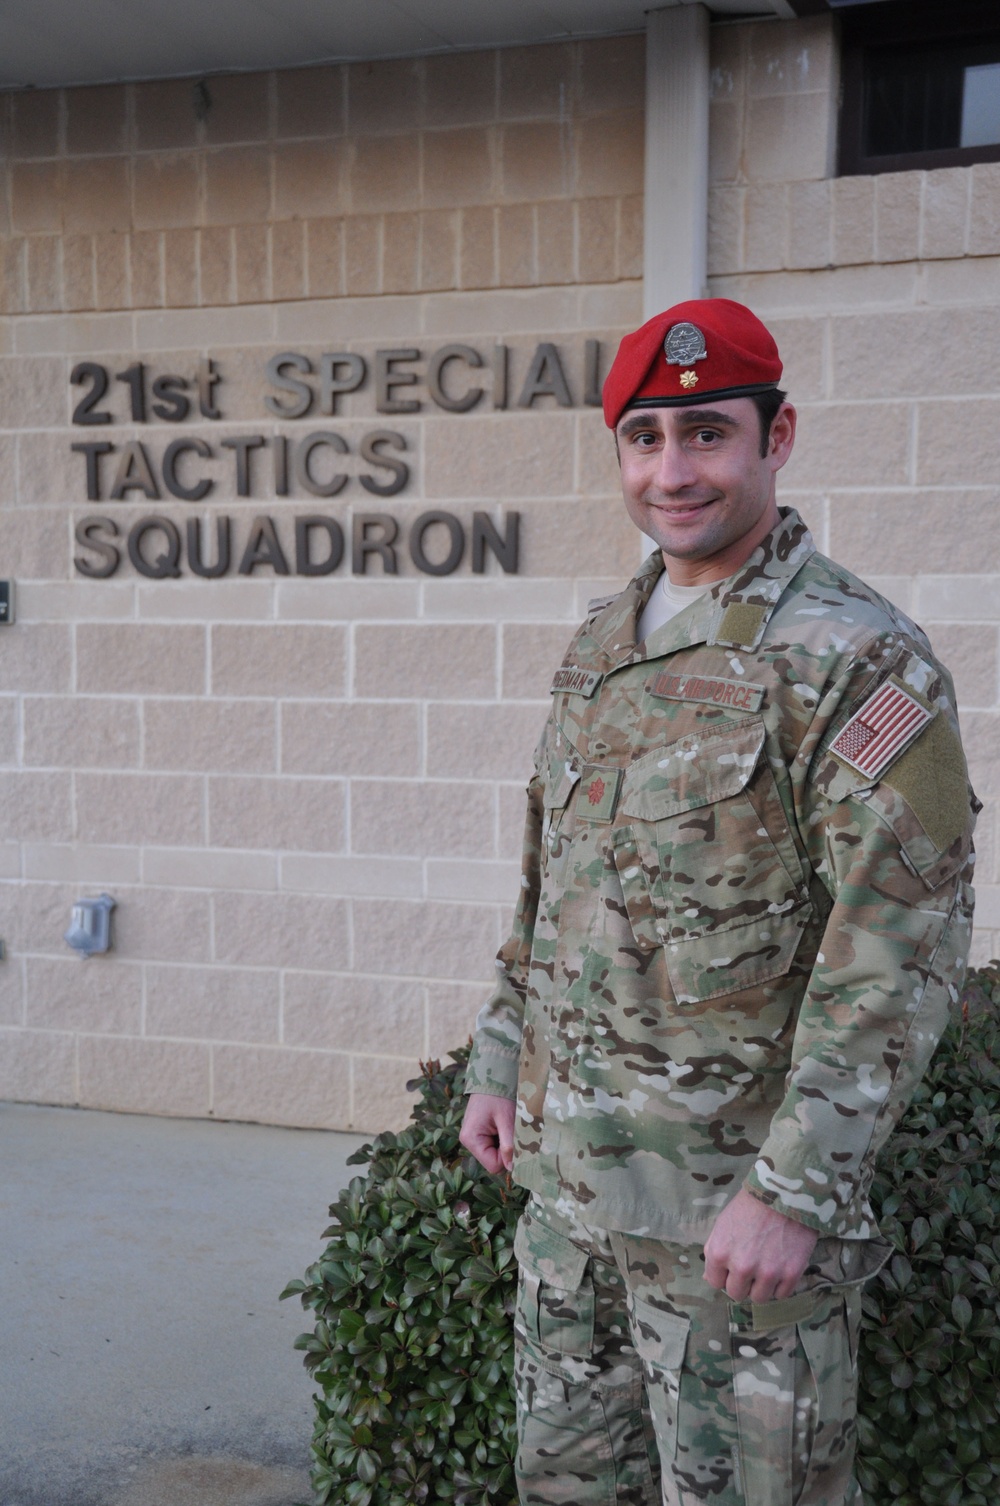 Pope Field airman uses training and instinct to save life